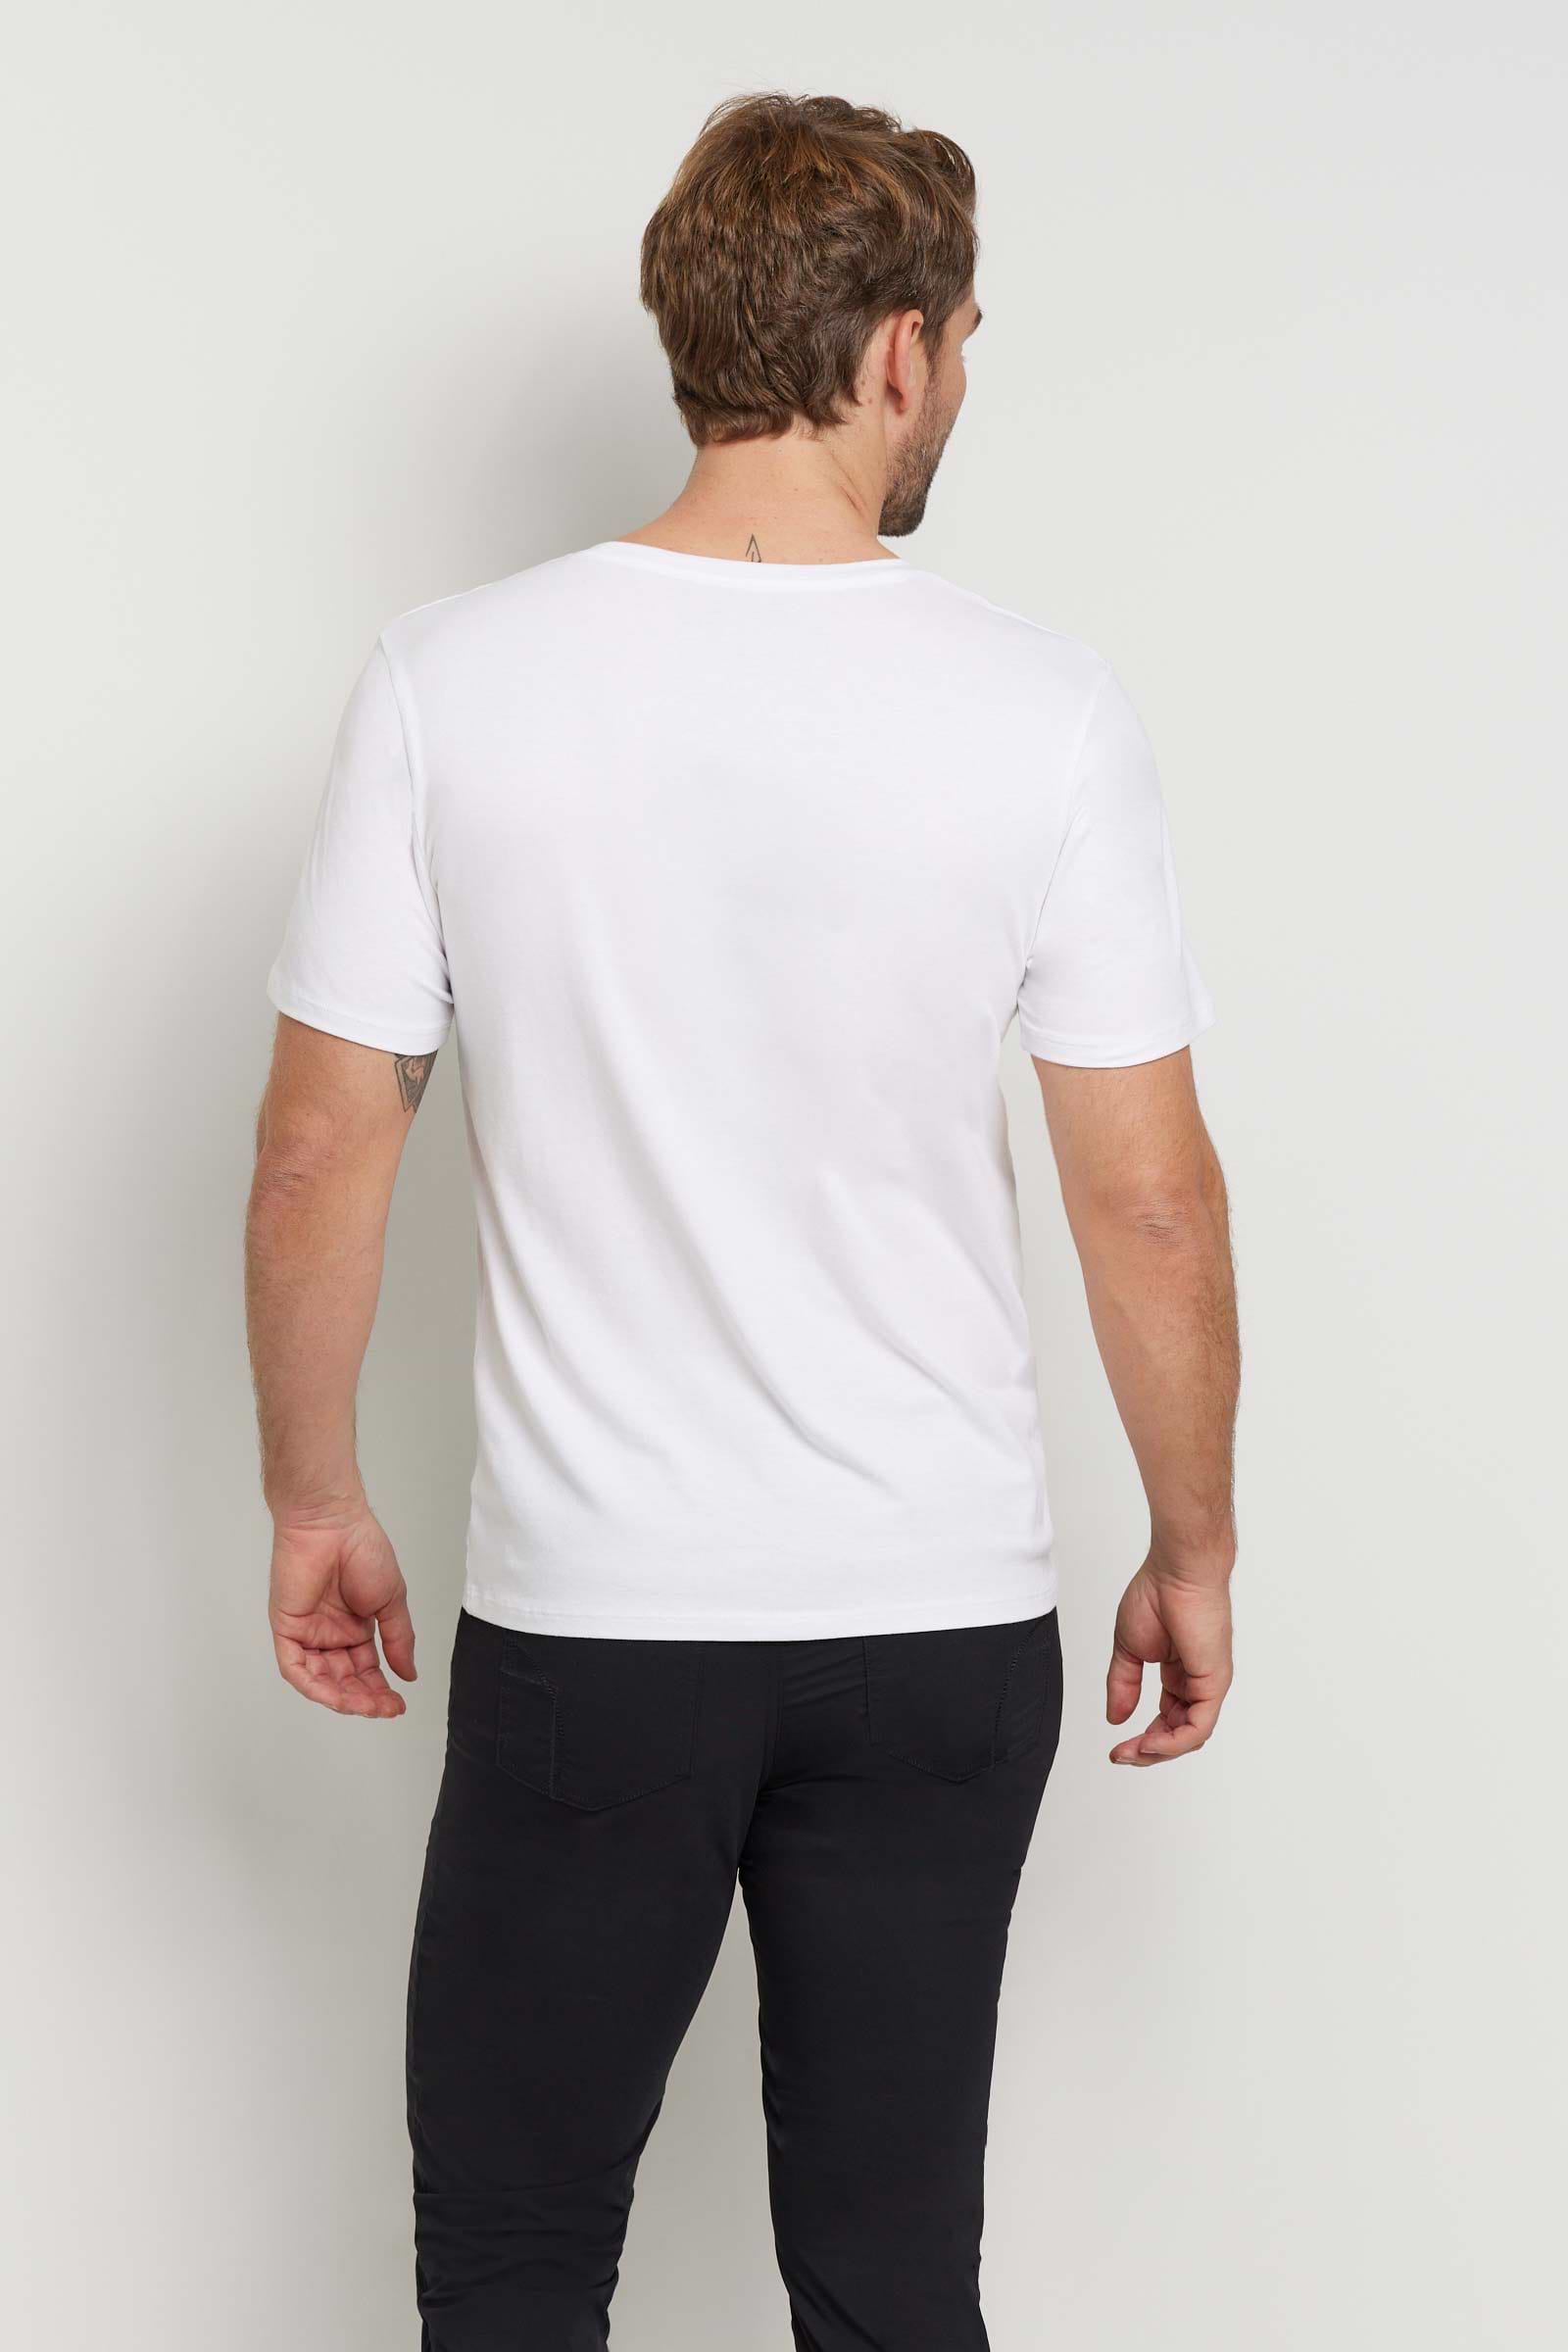 The Best Travel Top. Man Showing the Back Profile of a Men's Scott Top in White.